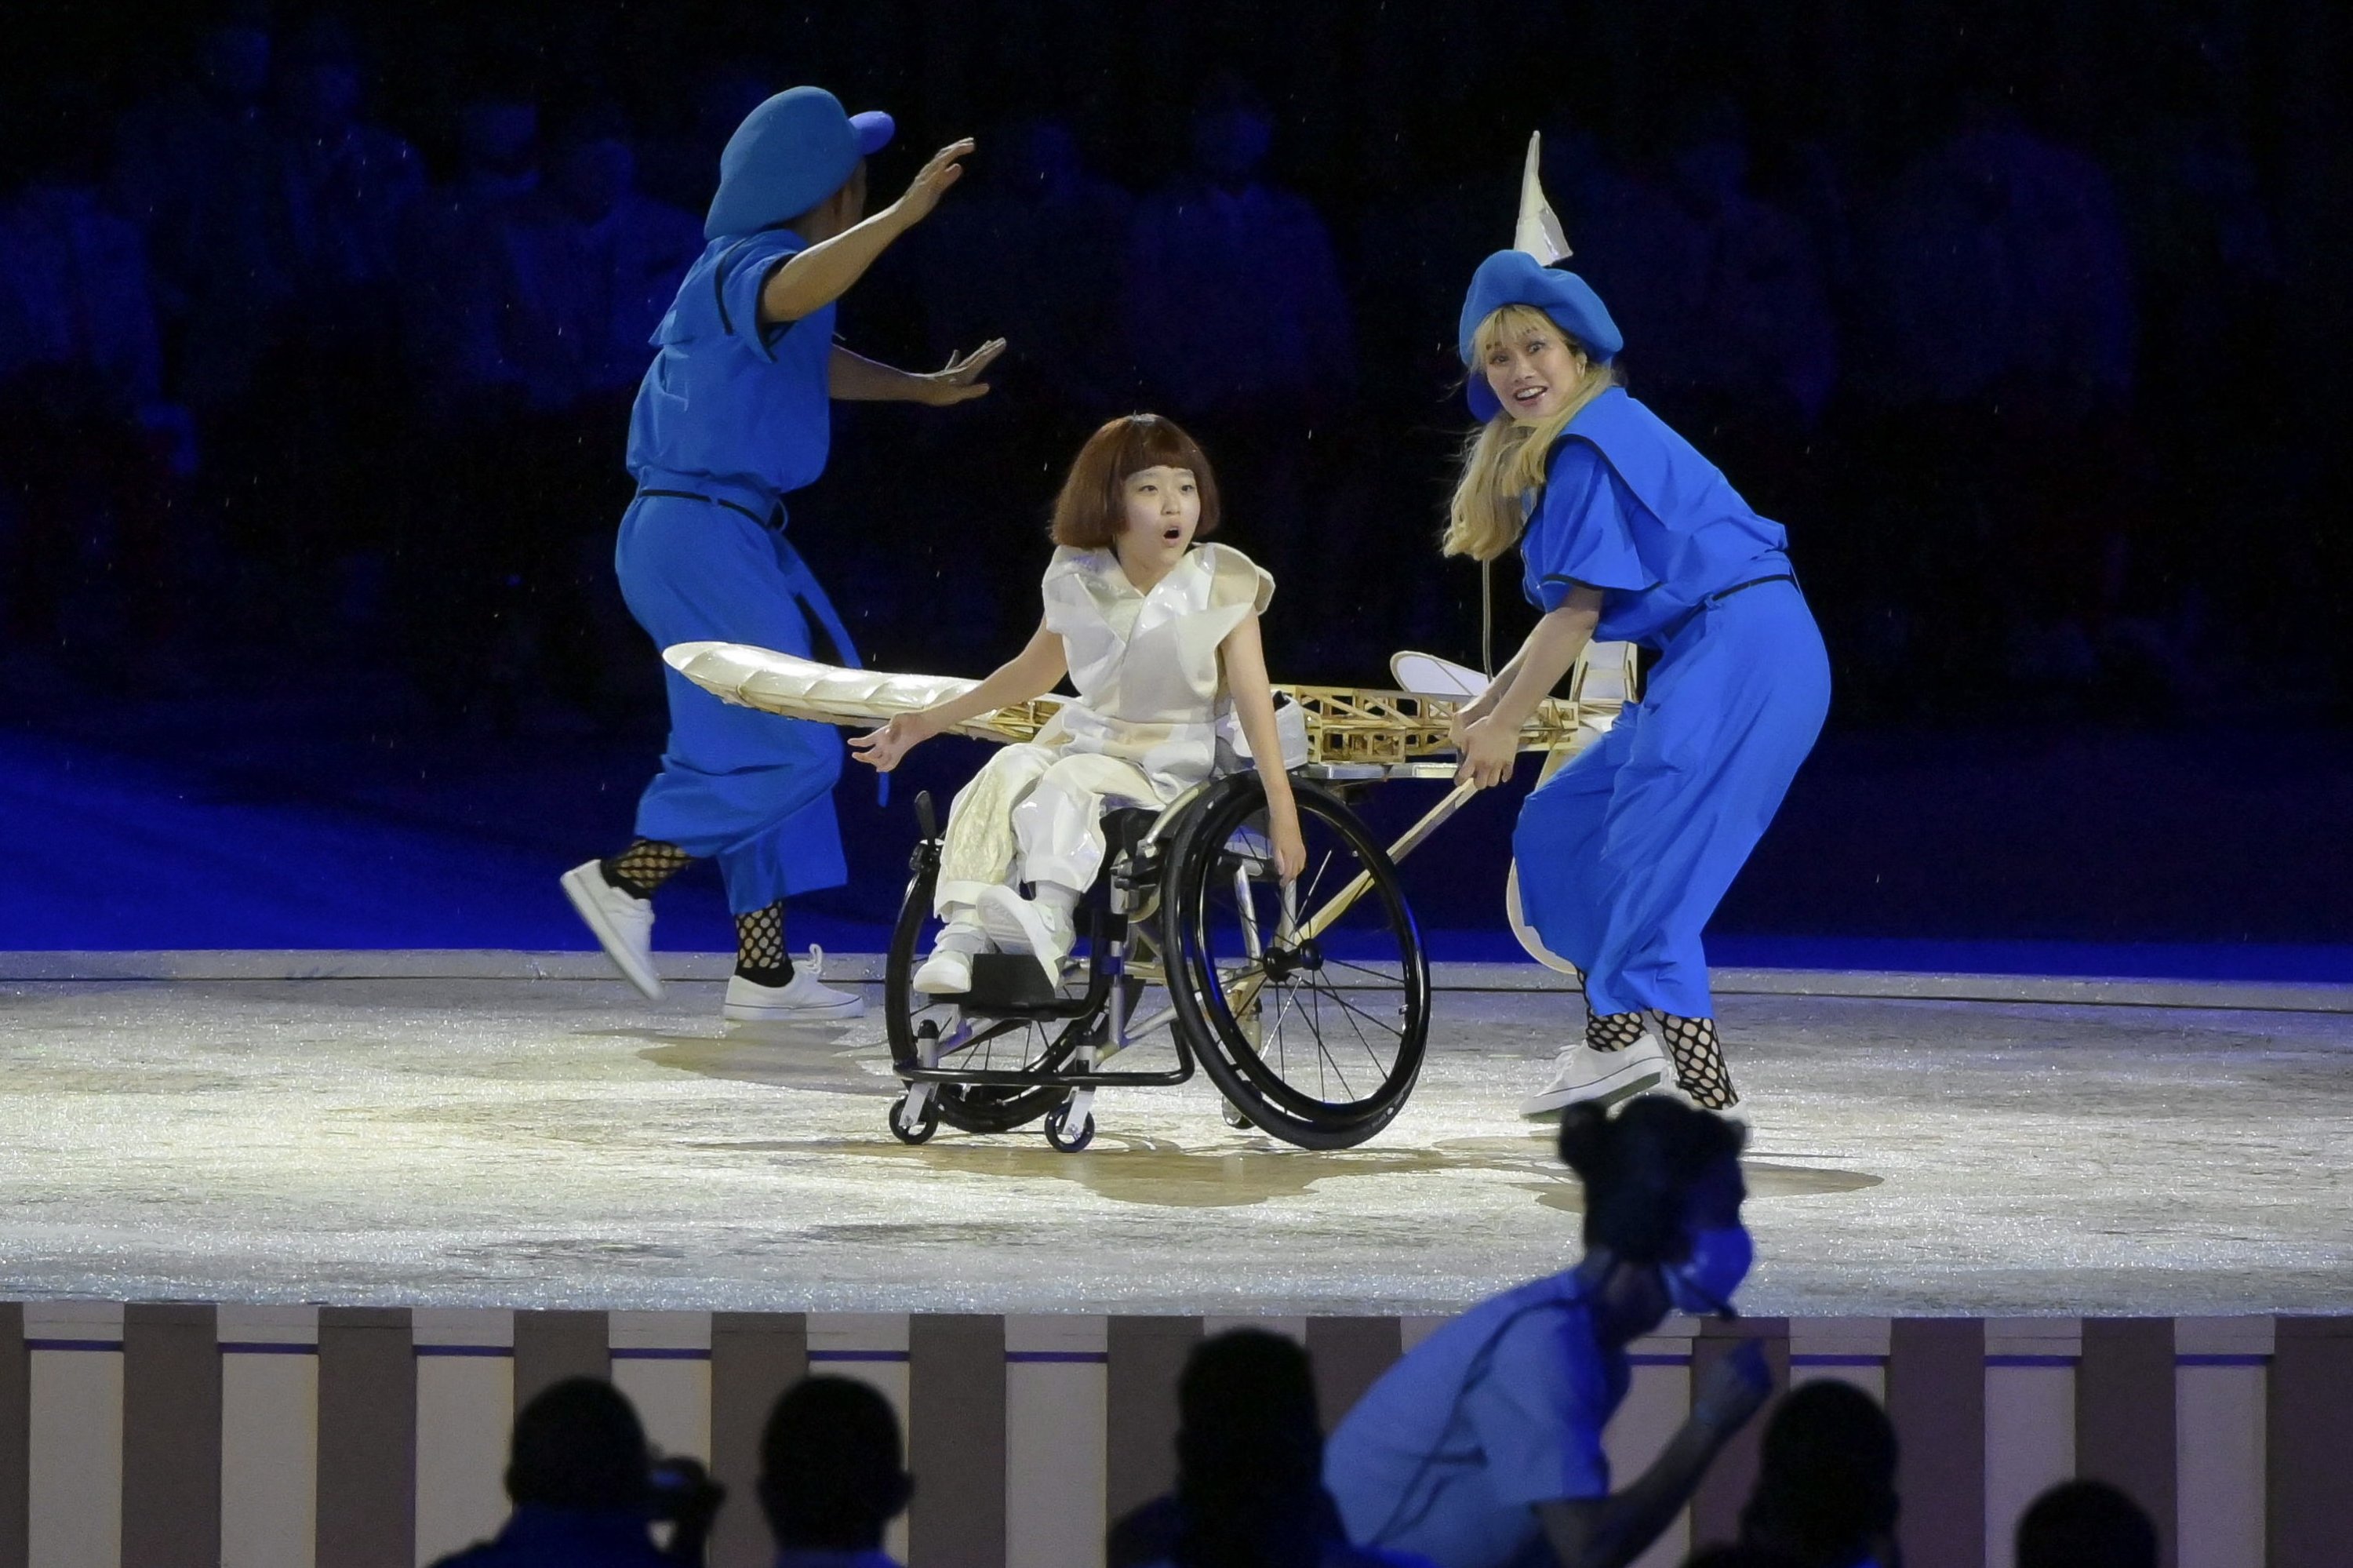 Artists perform during the Tokyo 2020 Paralympic Games opening ceremony at the Olympic Stadium in Tokyo, Japan, Aug. 24, 2021. (EPA Photo)